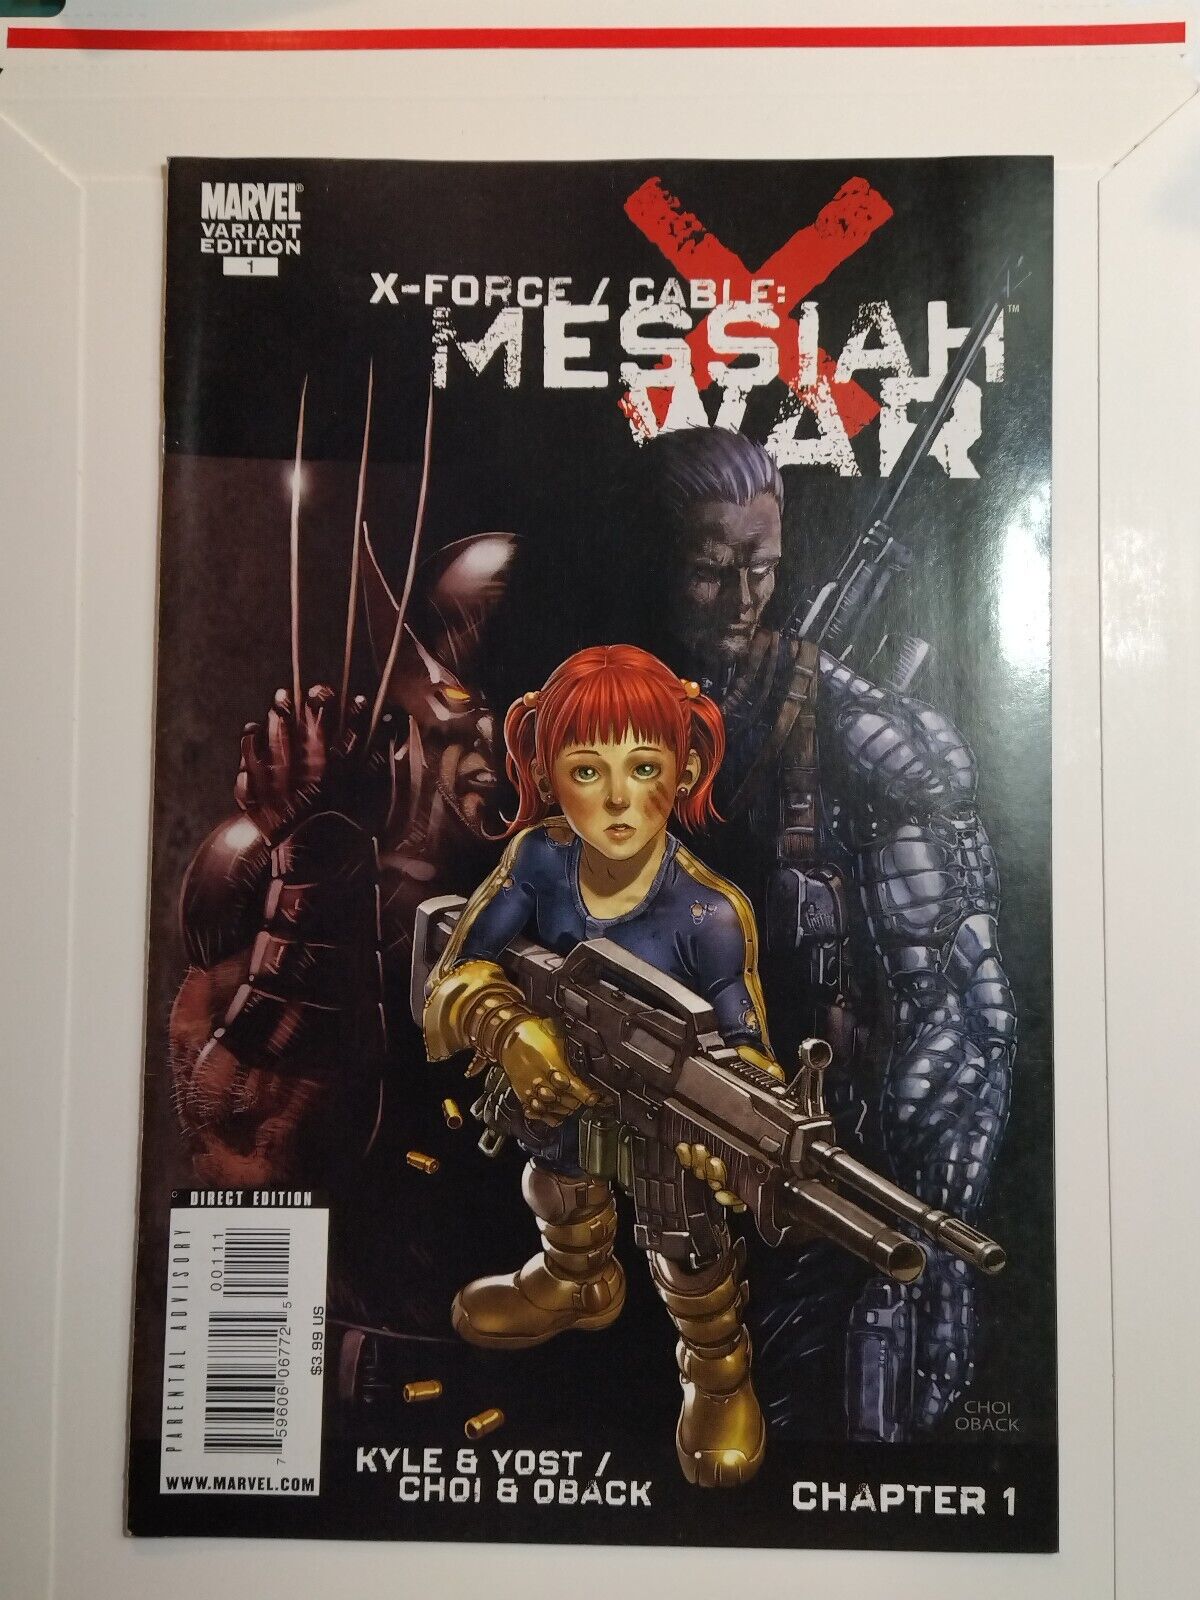 X-Force Cable Messiah War # 1 Marvel May 2009